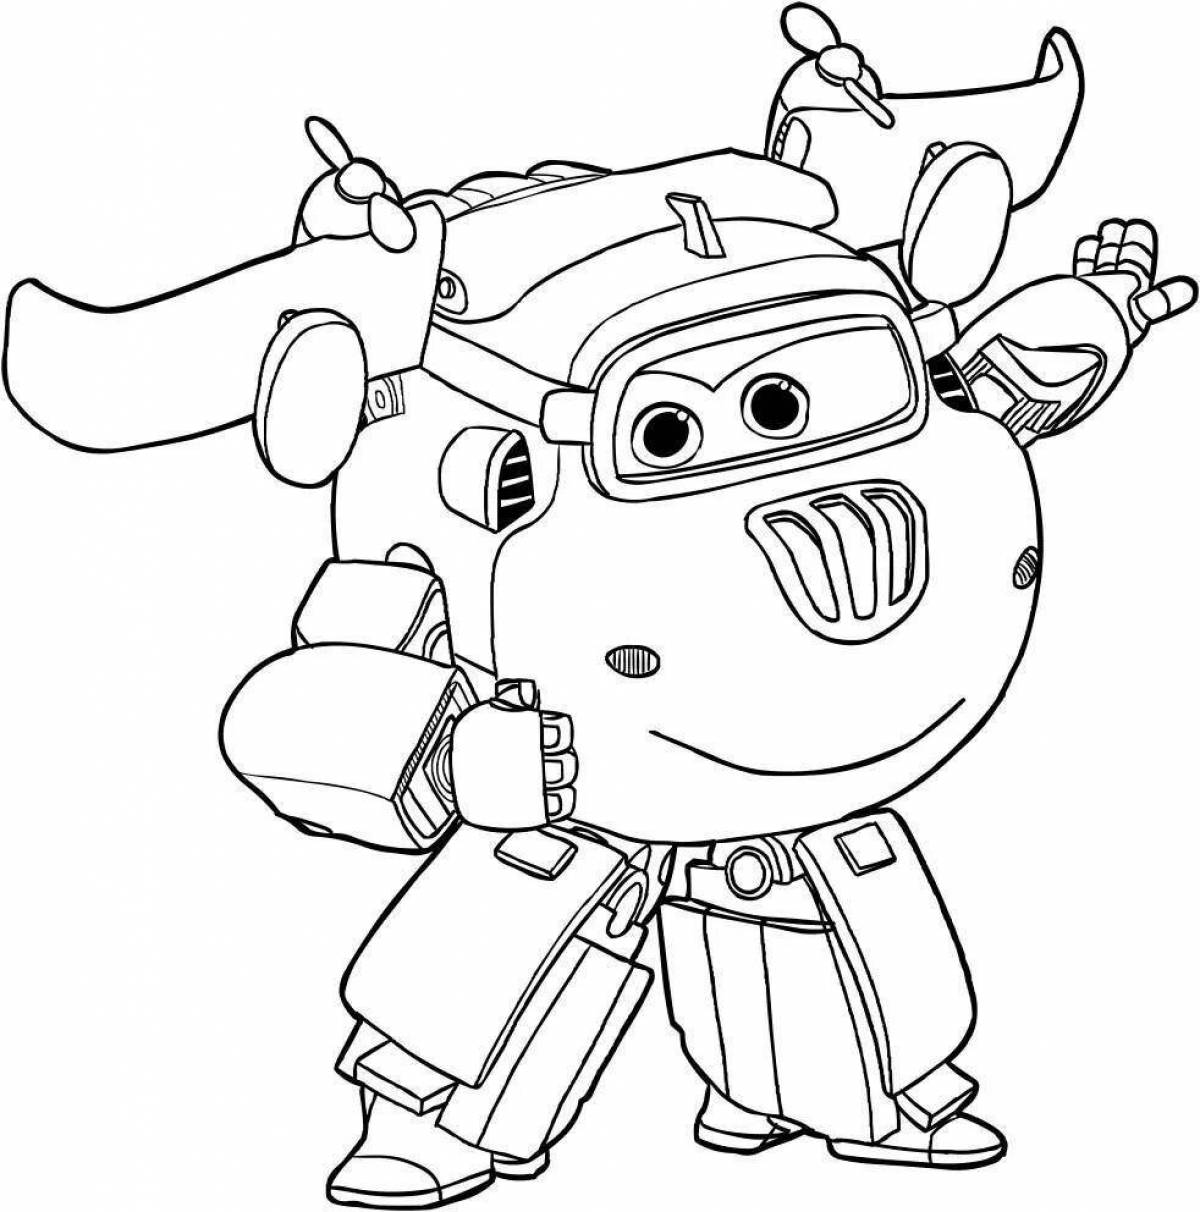 Impressive crystal super wings coloring page